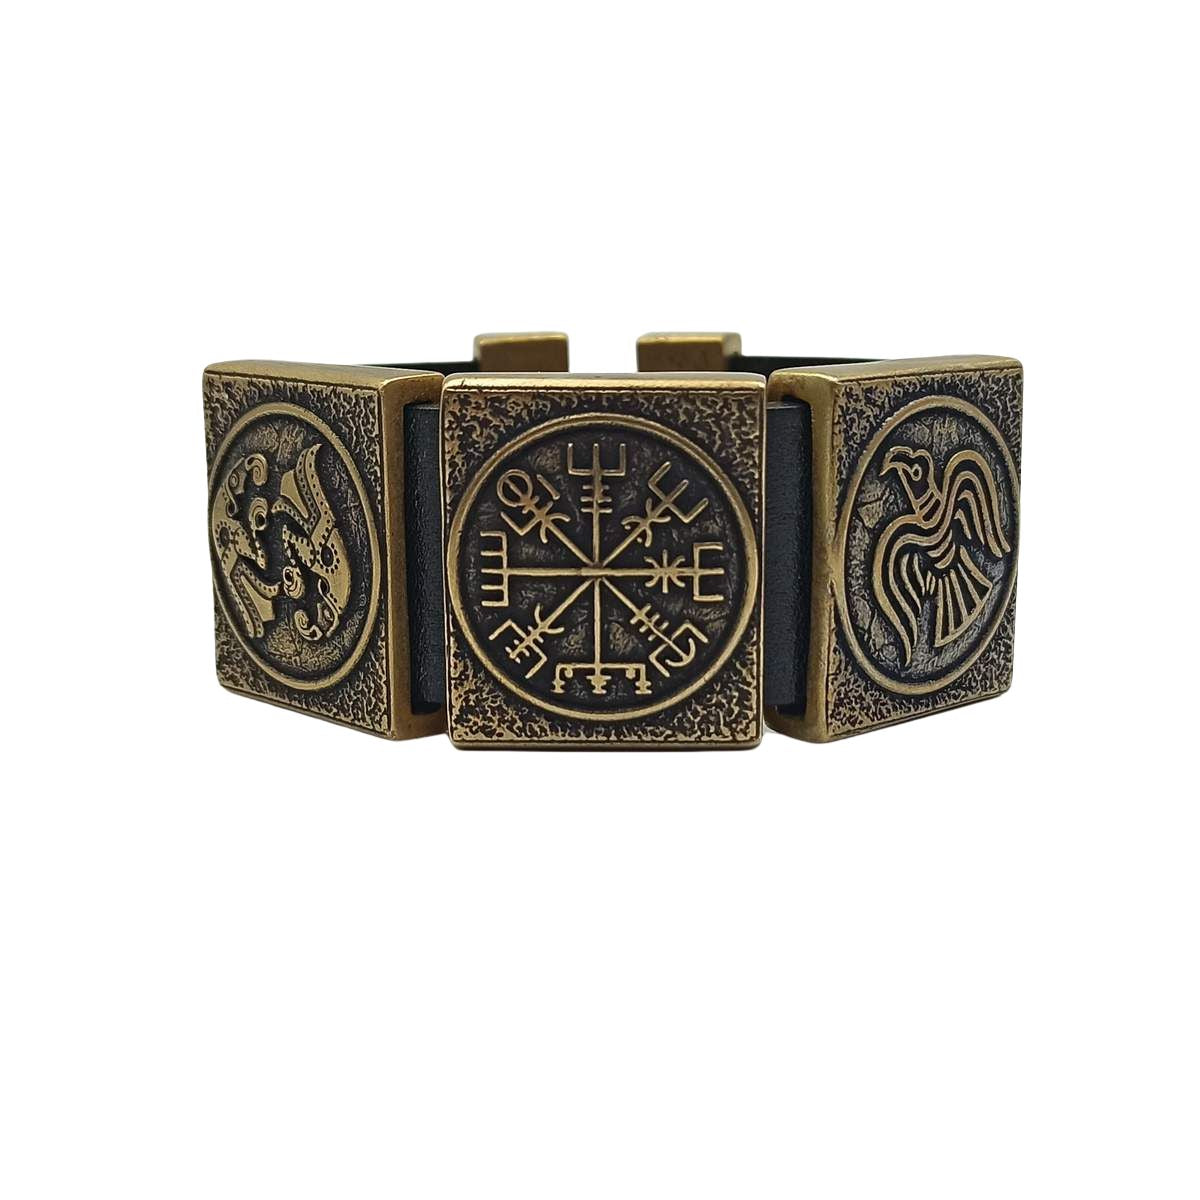 Viking compass leather bracelet 16 cm | 6.3 inch Bronze with patina 